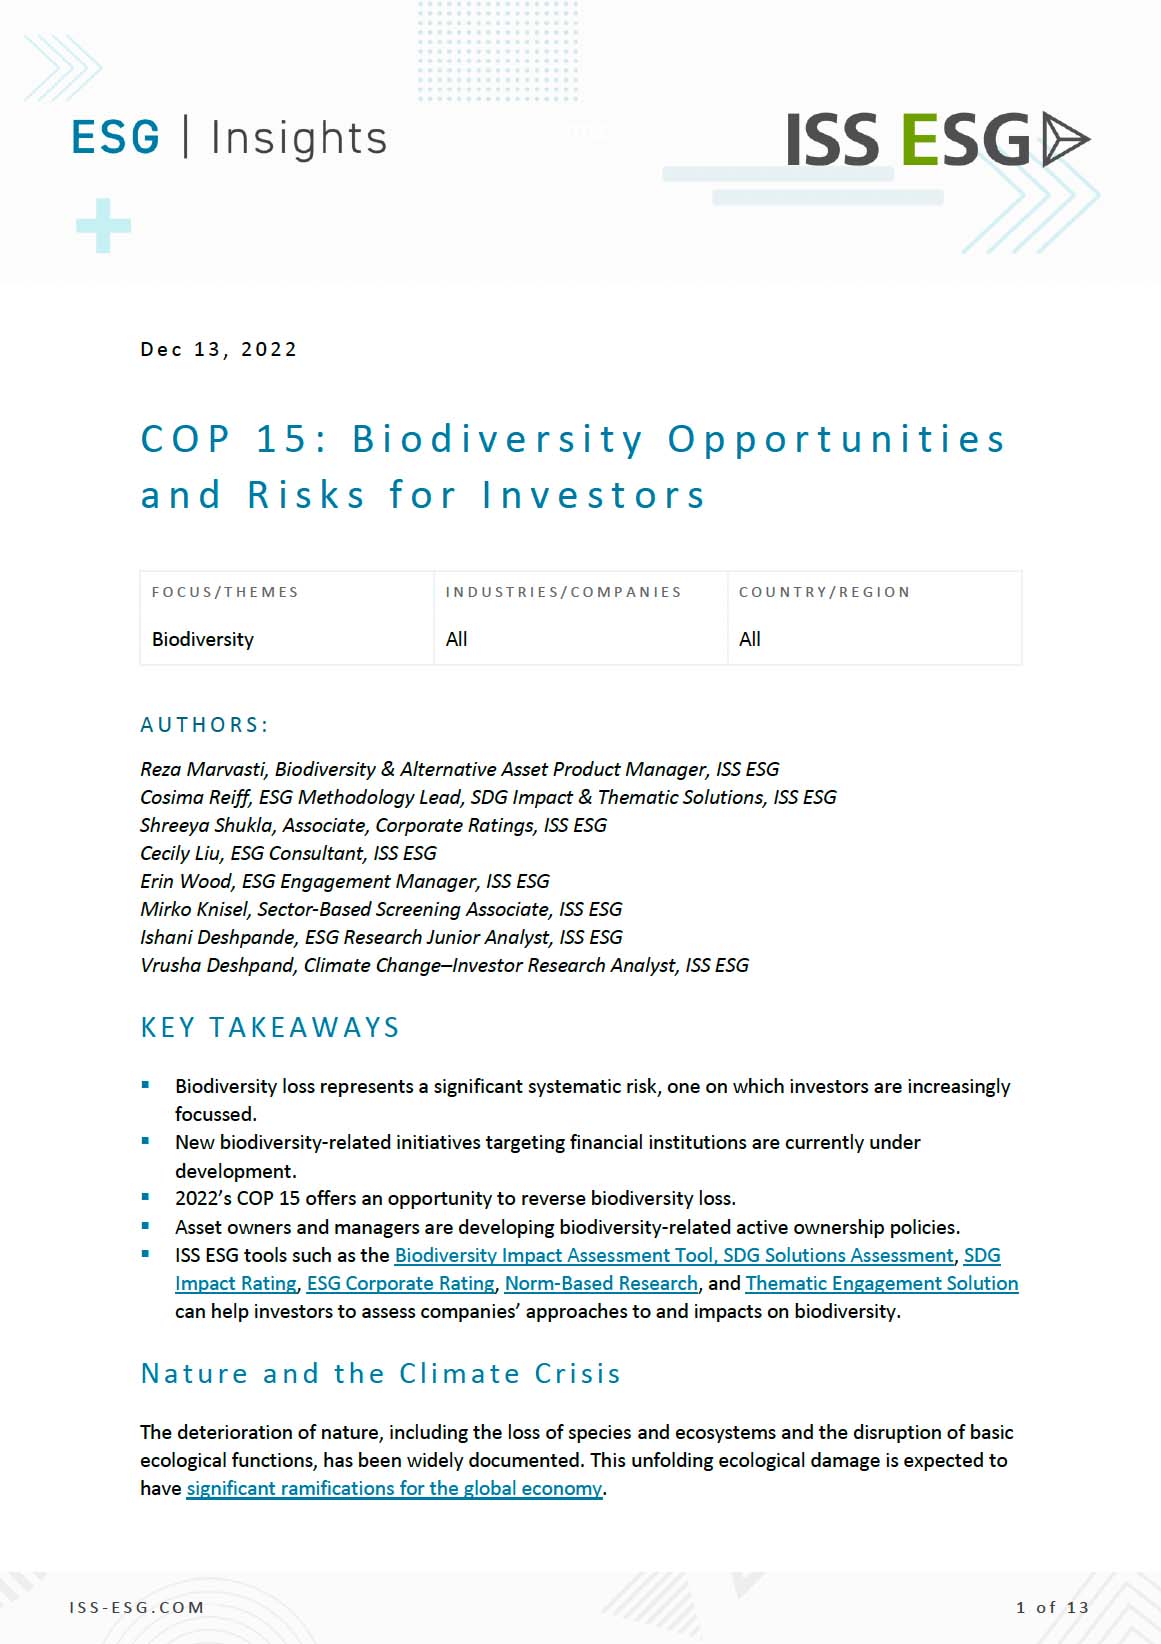 COP 15: Biodiversity Opportunities and Risks for Investors